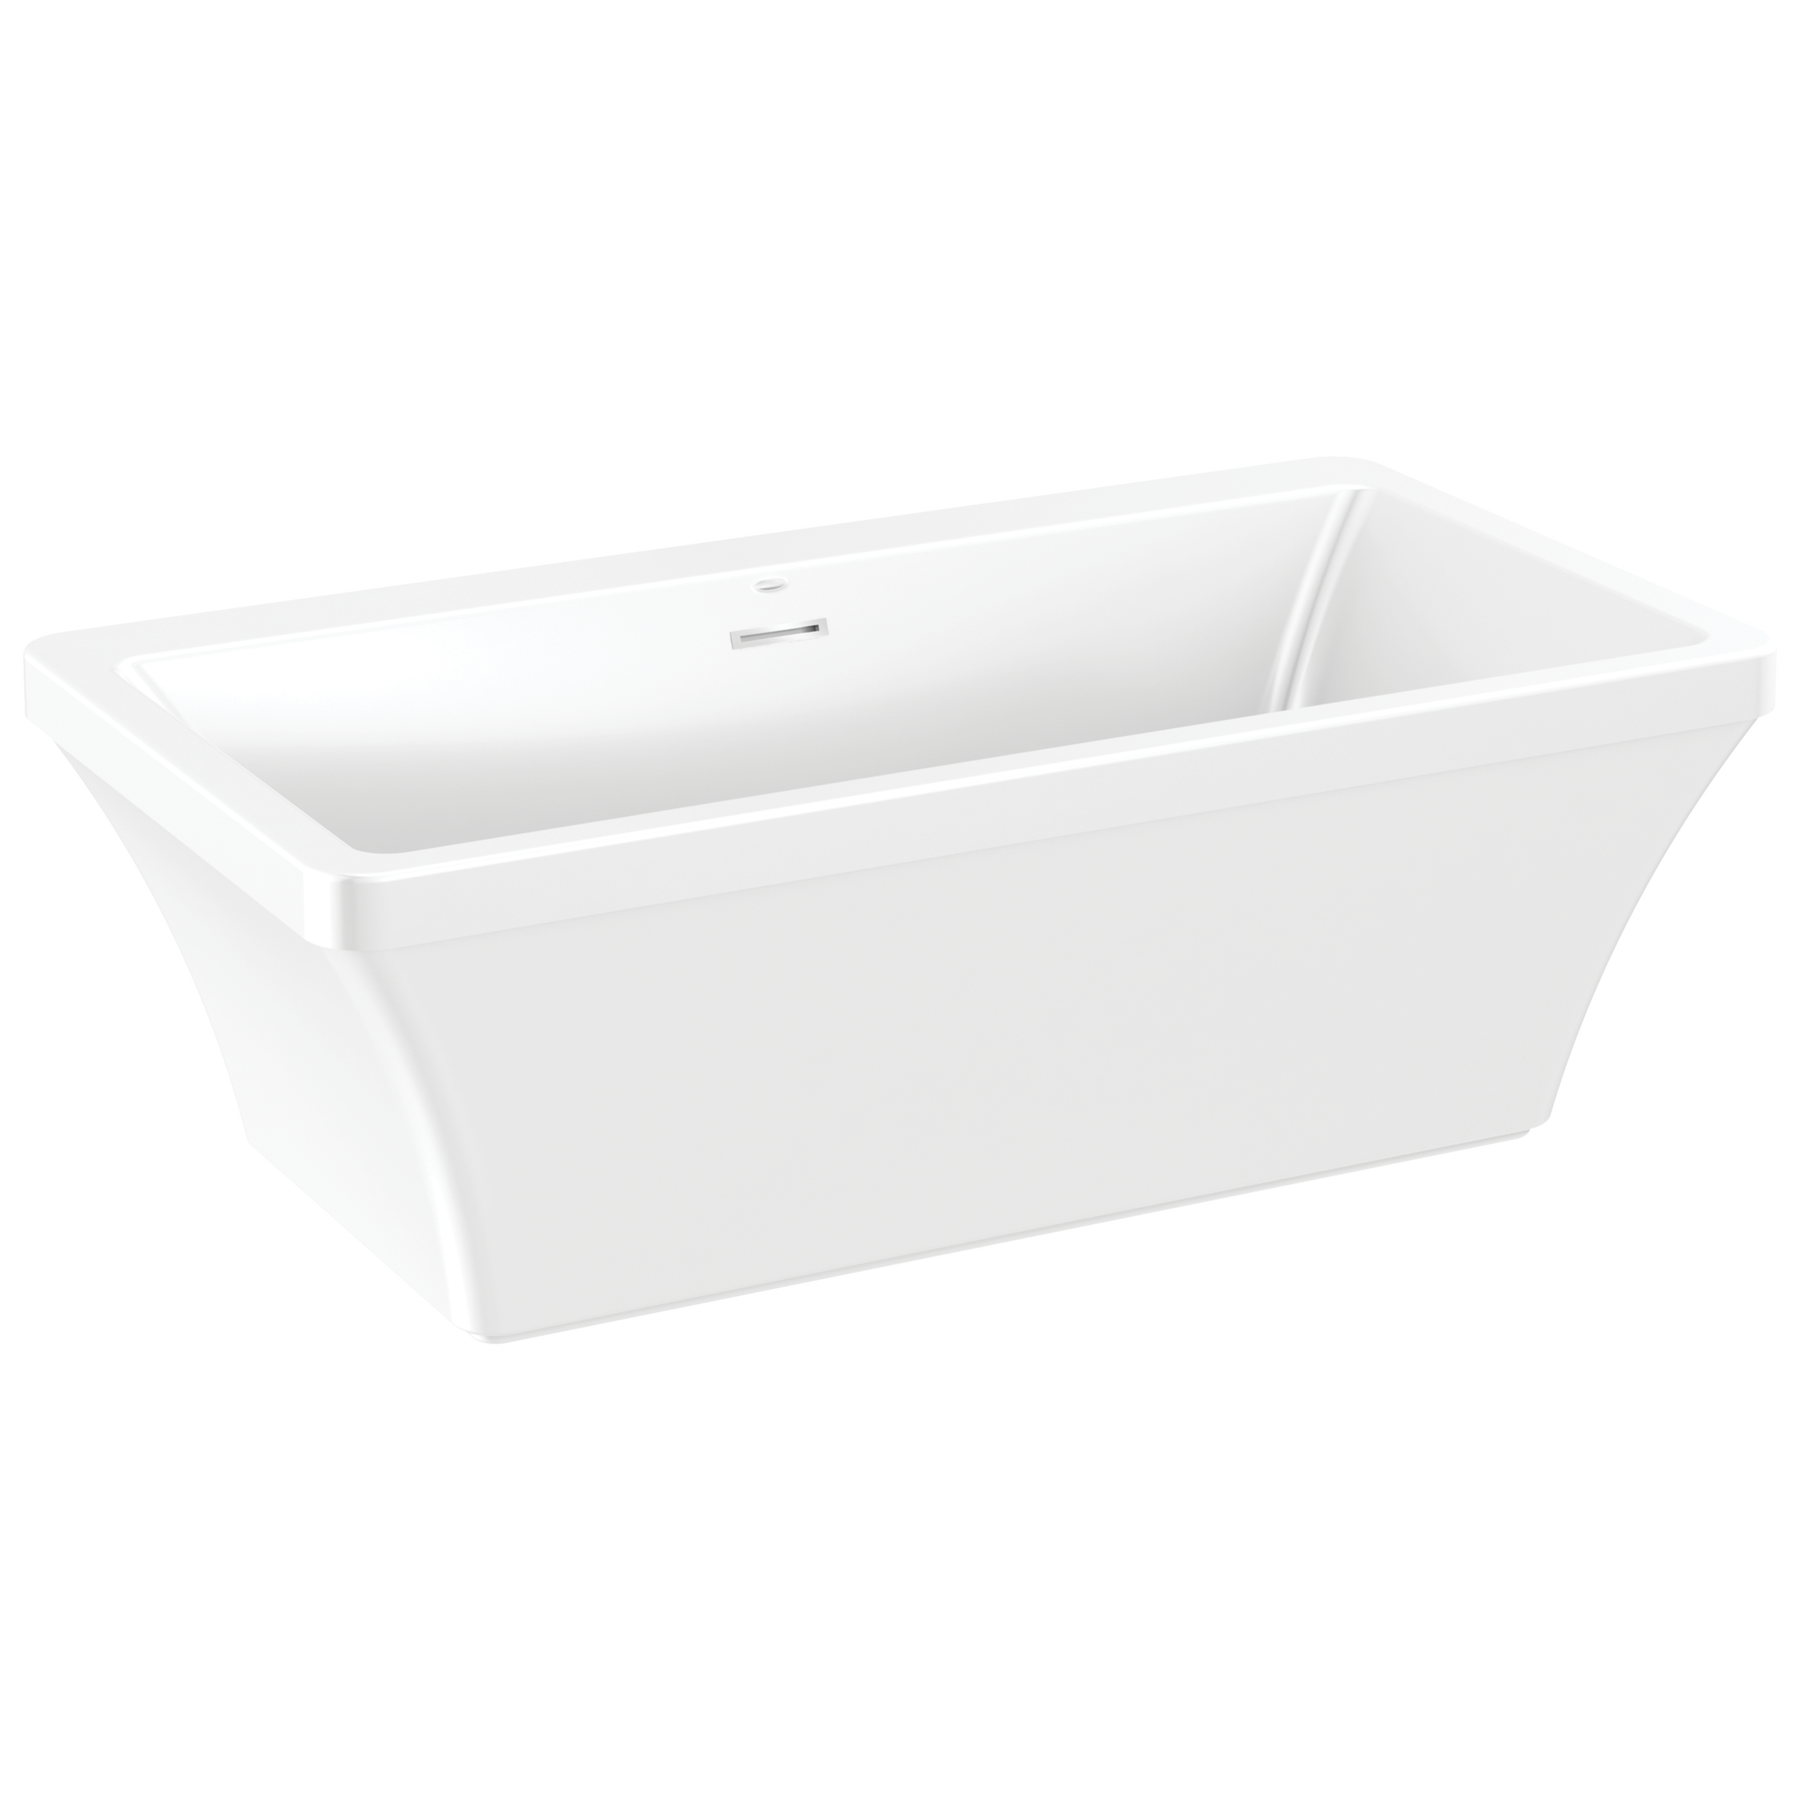 6 dia. x 6 Deep Plastic Tubs, Made in USA